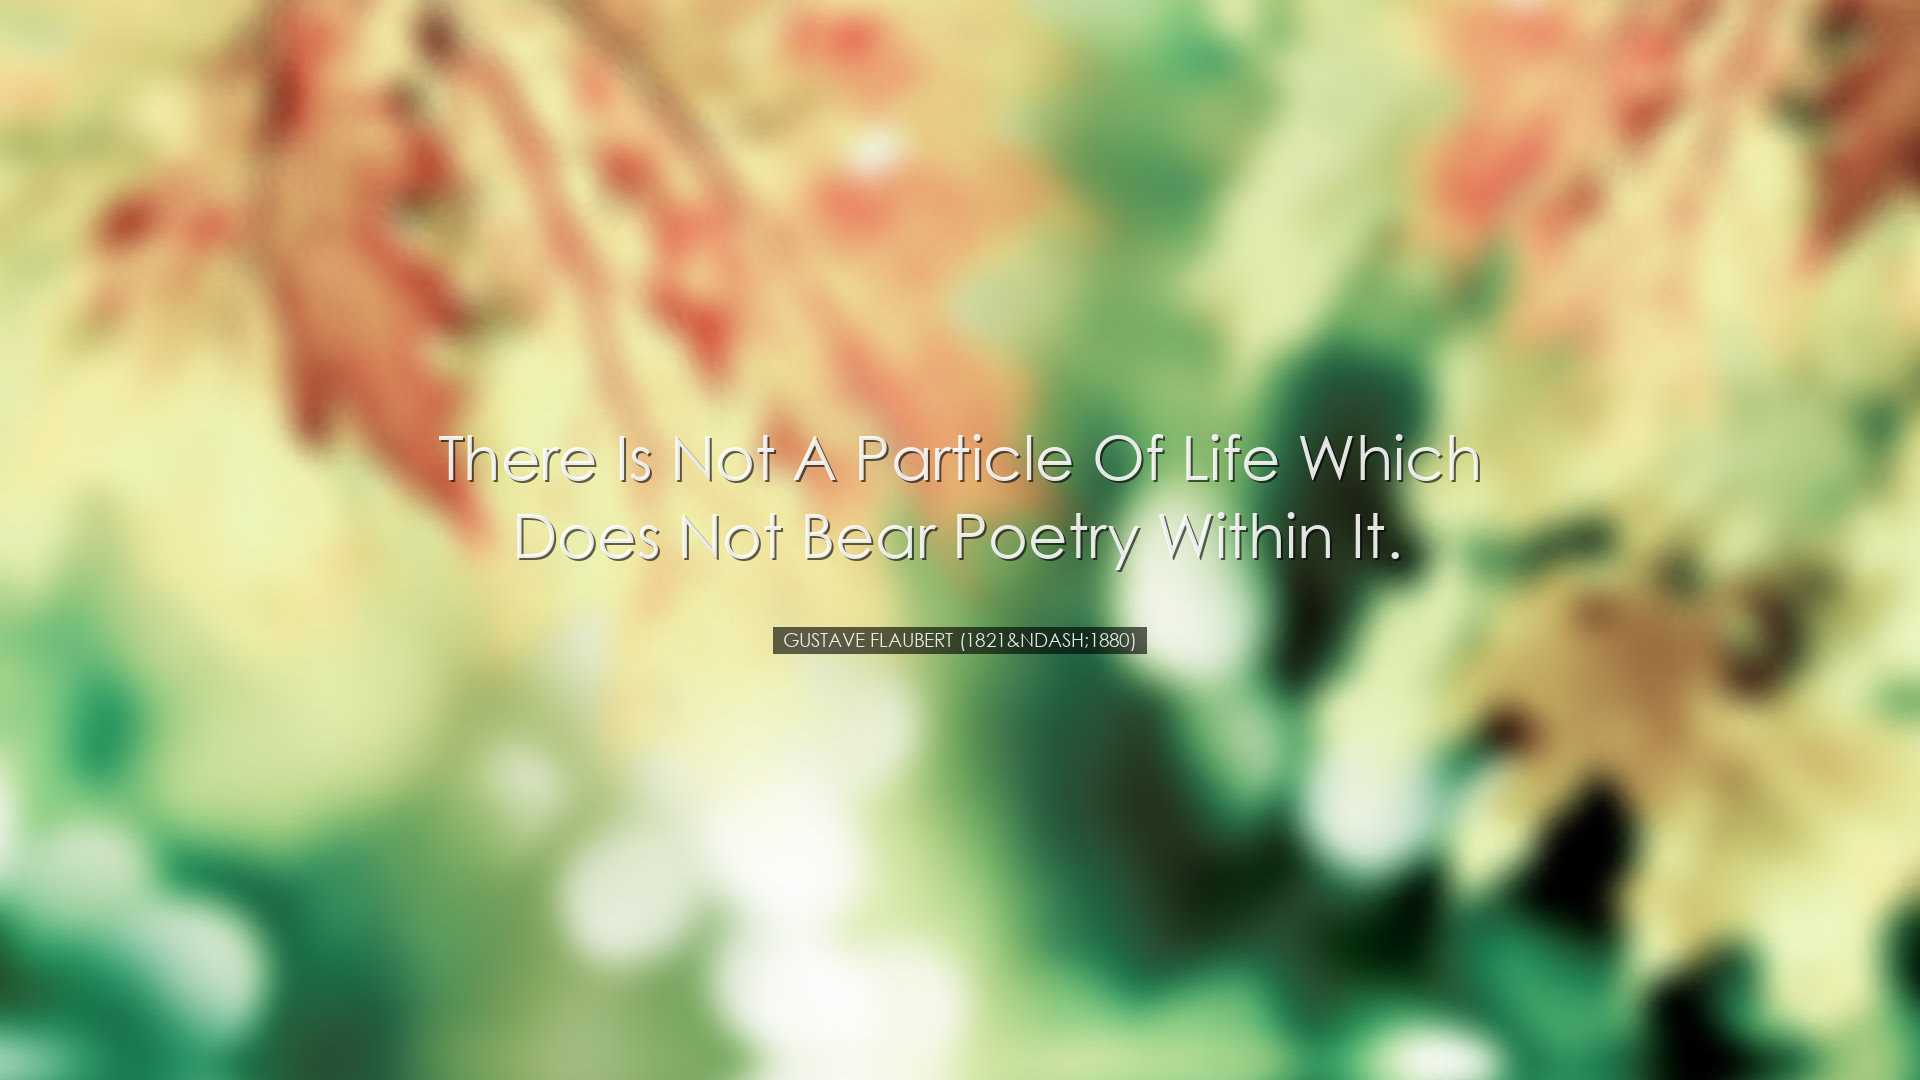 There is not a particle of life which does not bear poetry within